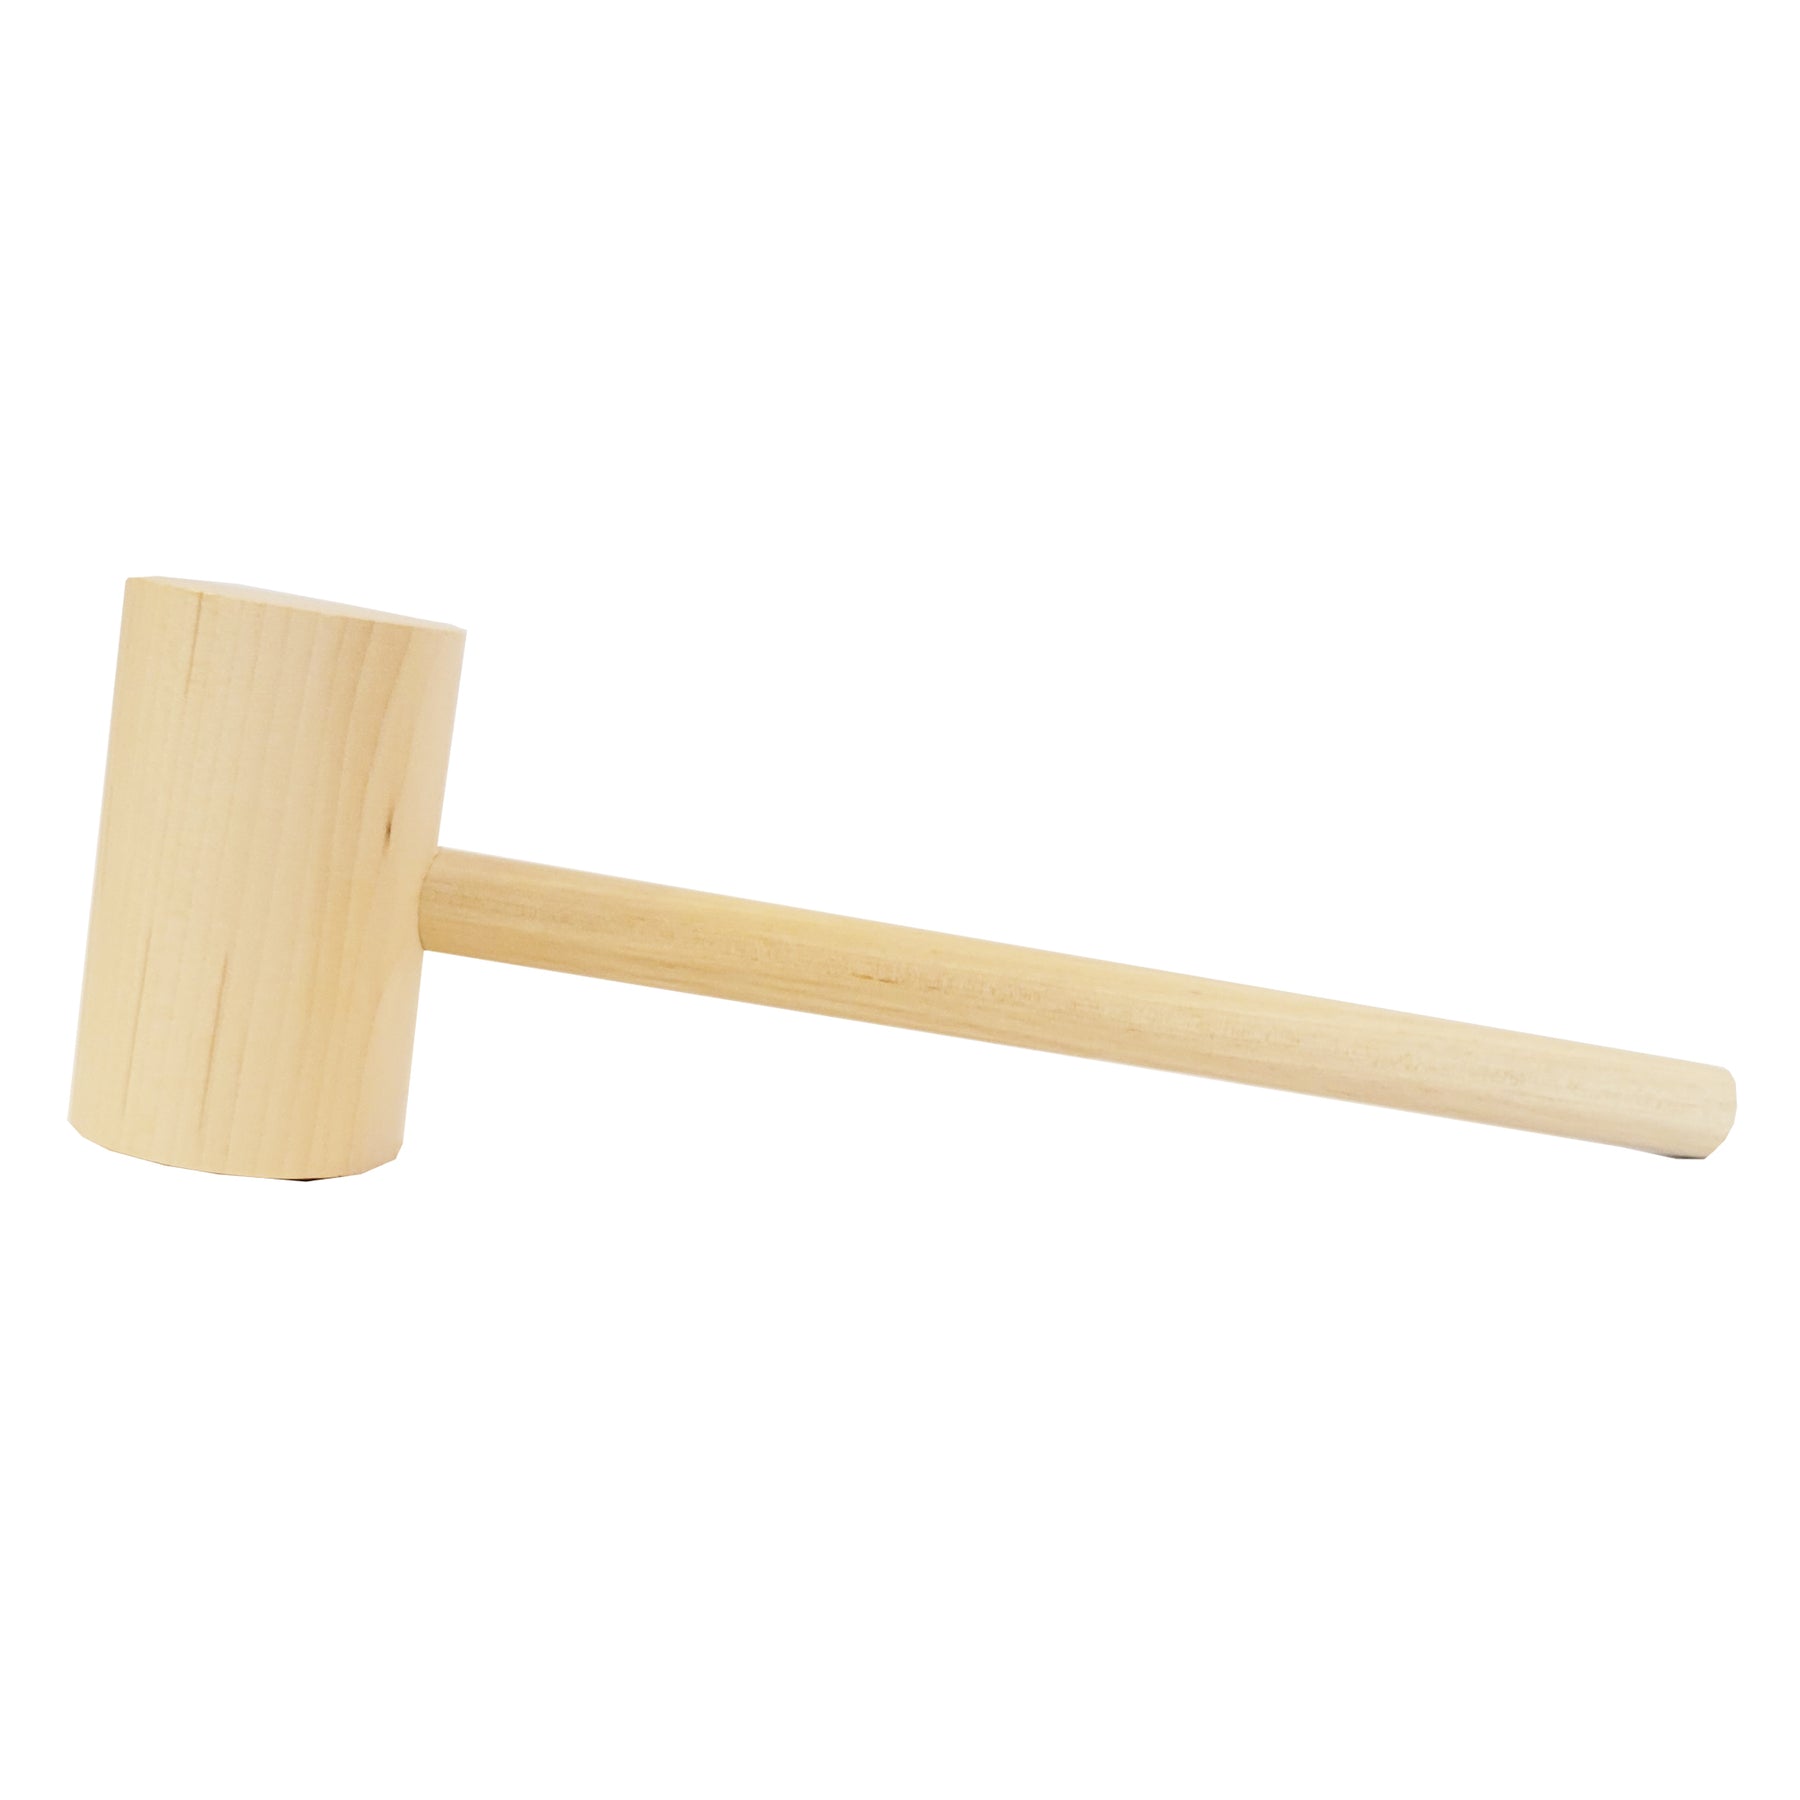 Wooden Crab Mallet – The Maryland Store